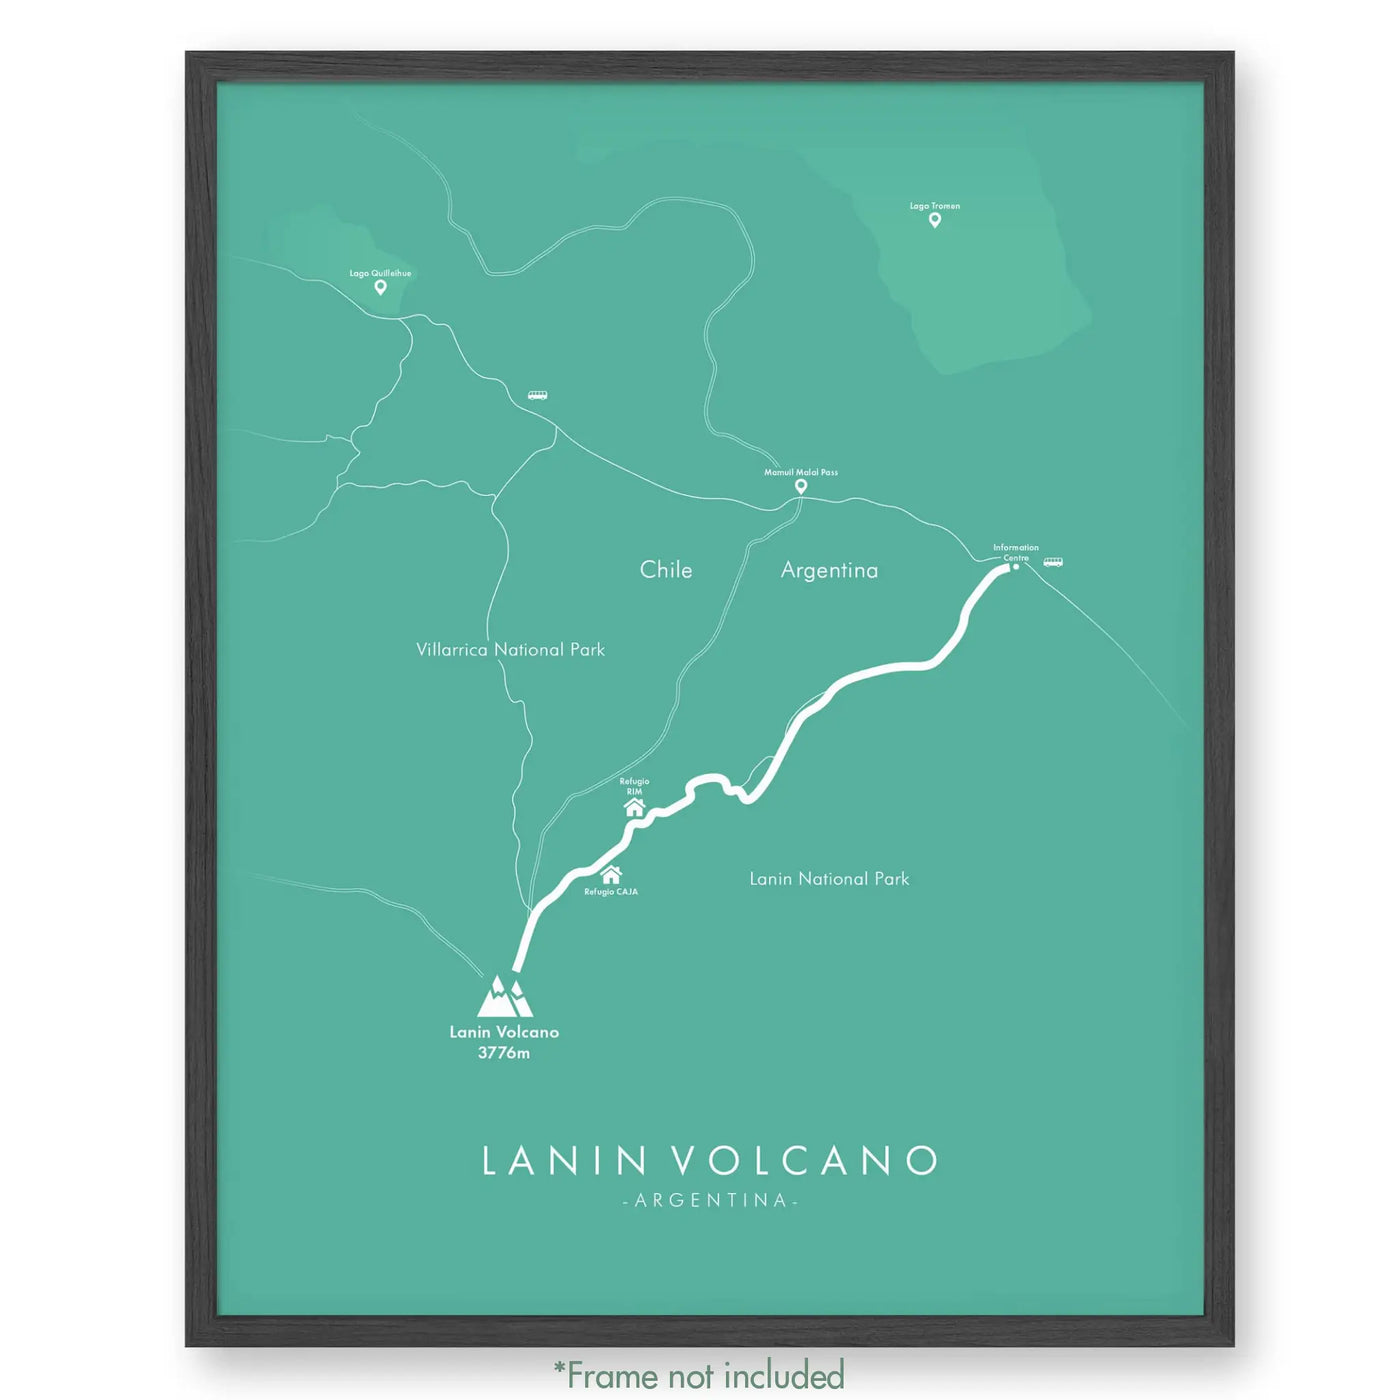 Trail Poster of Lanin Volcano Hike - Teal